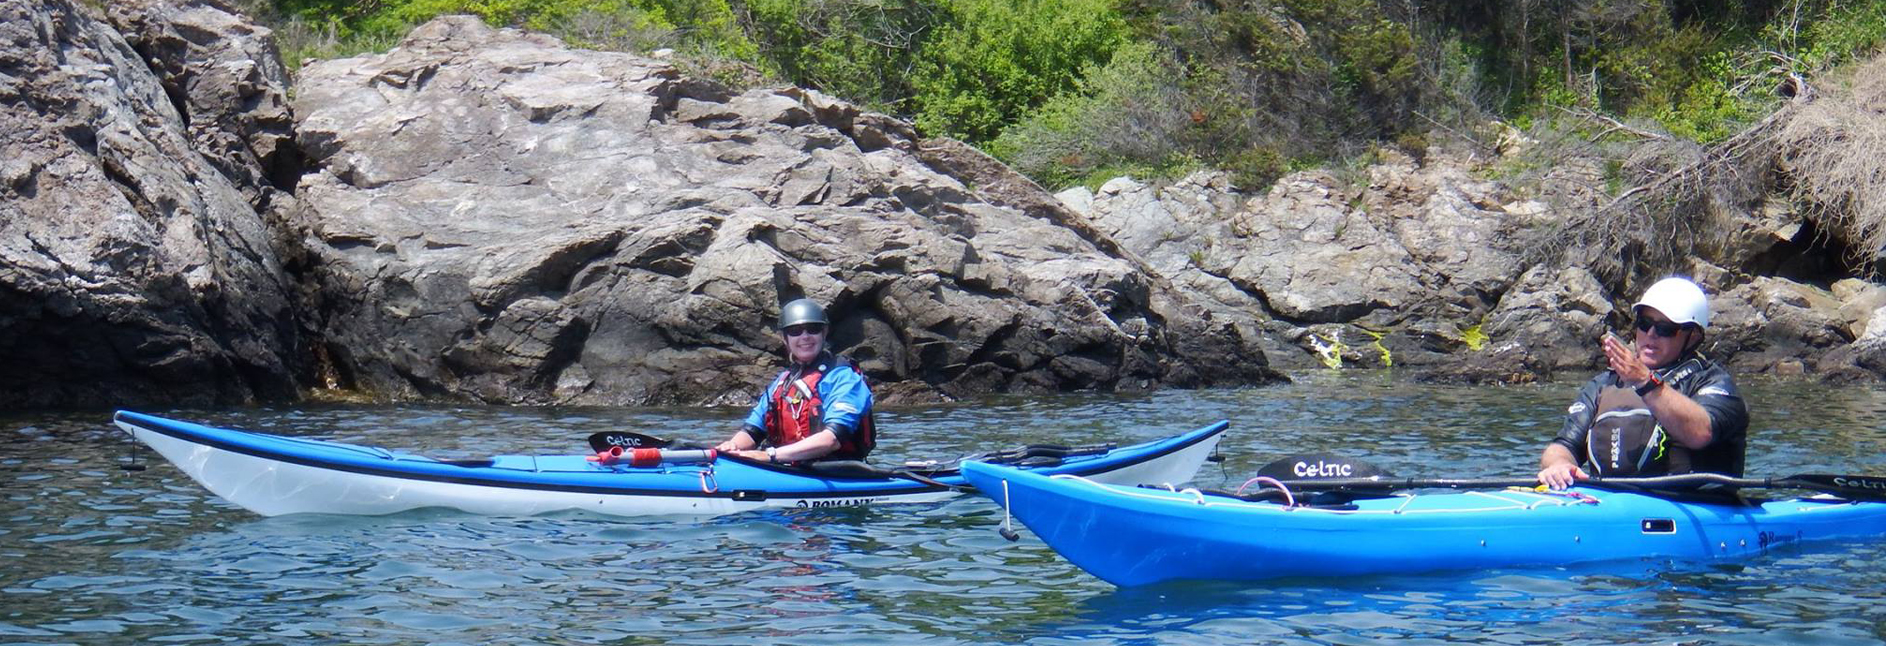 kayak lessons learn kayaking connecticut